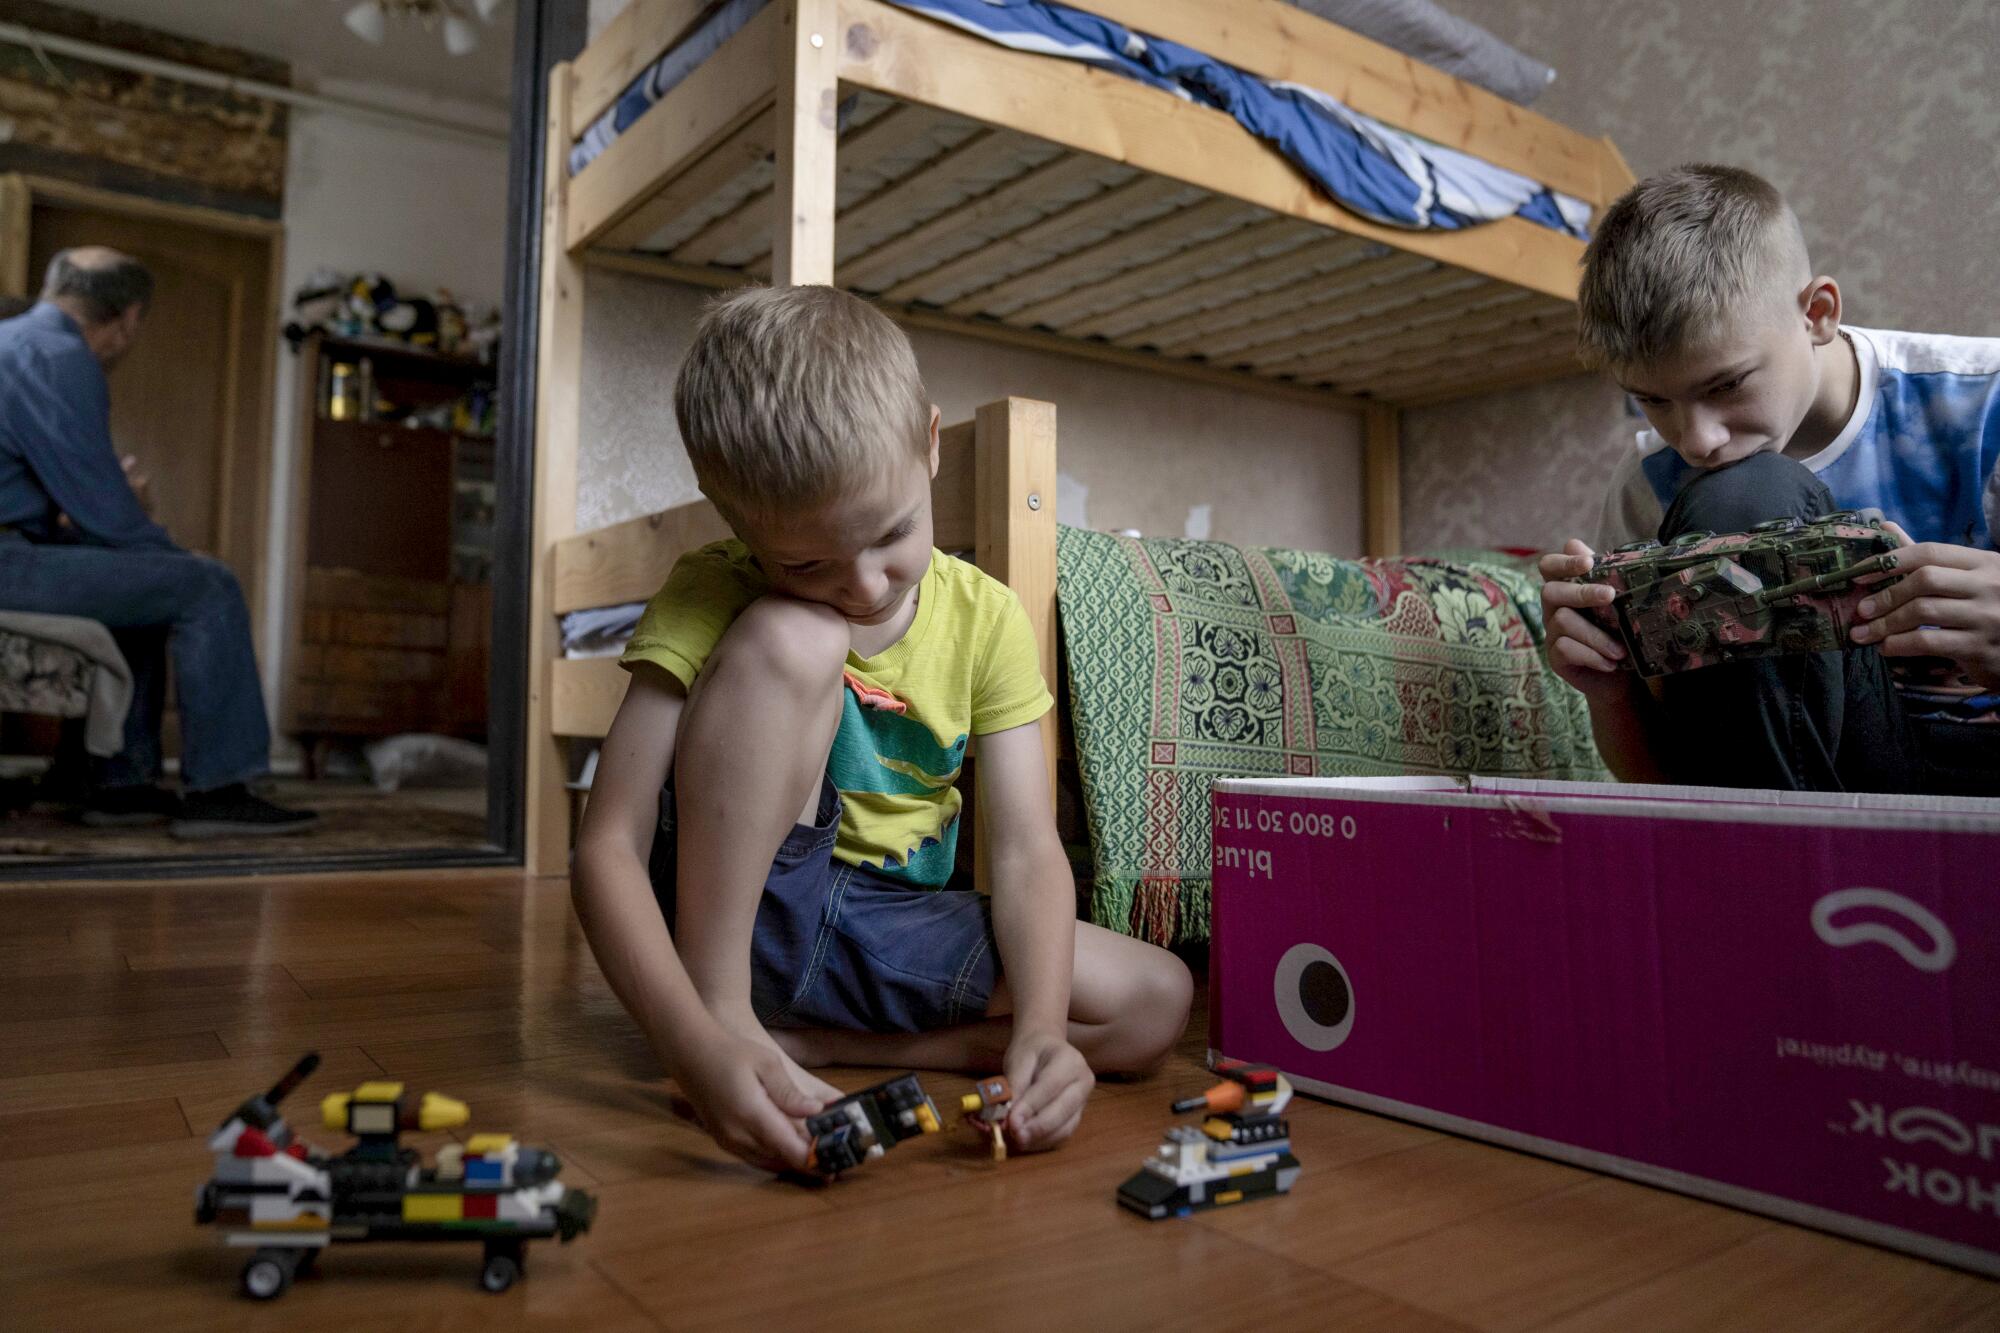 Two boys play with toys in a room.